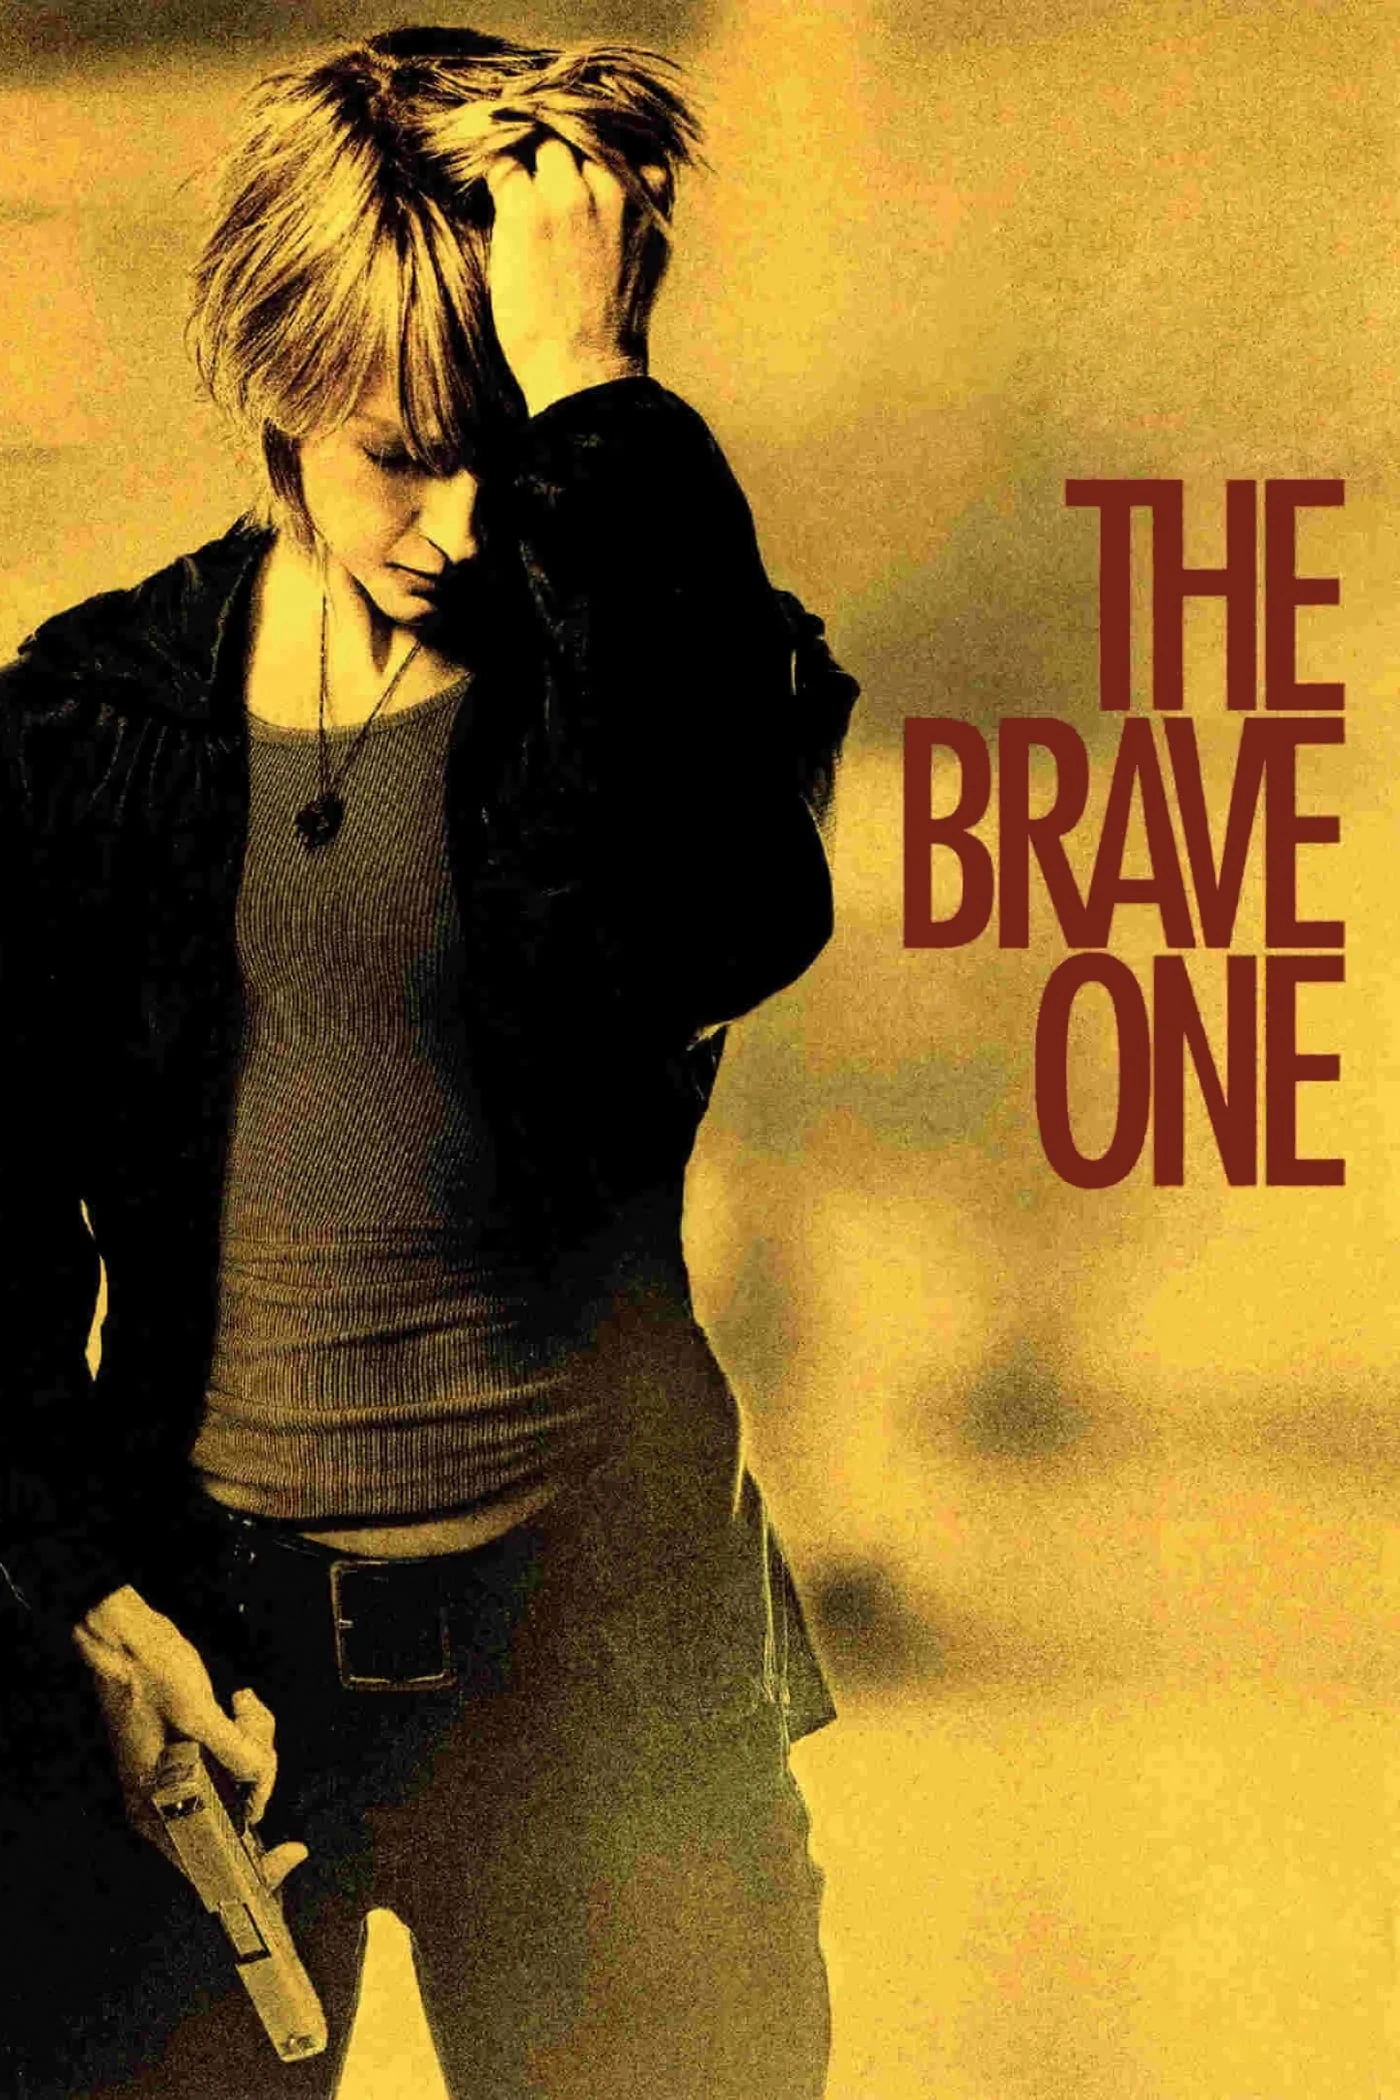 The Brave One | The Brave One (2007)